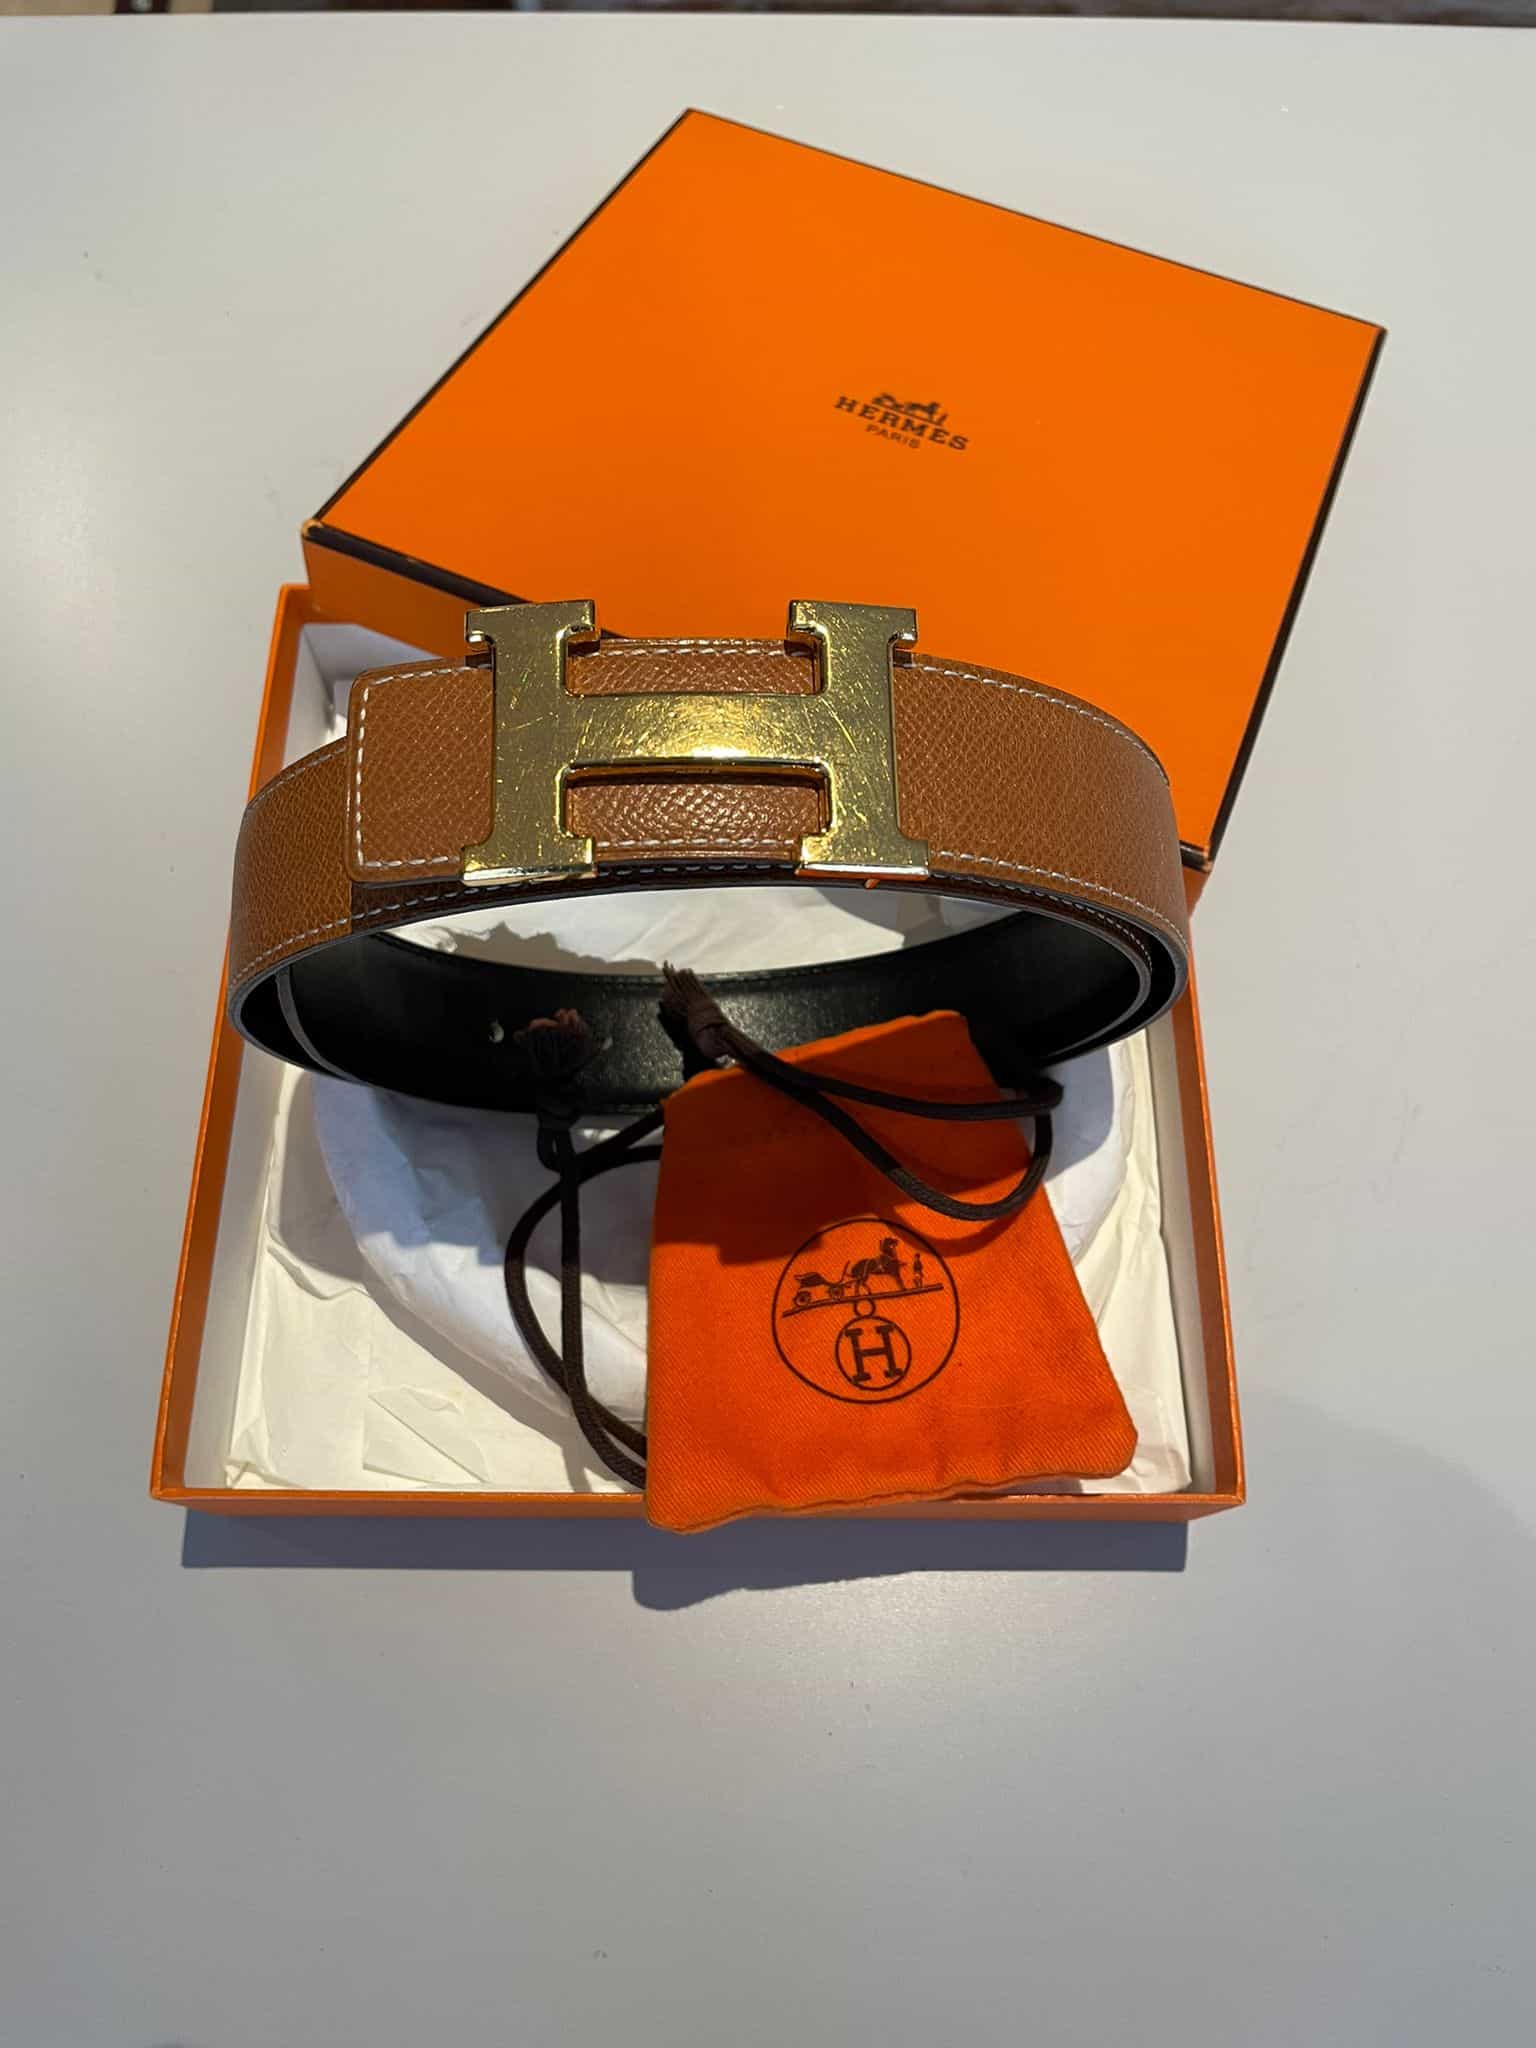 Hermes “H” belt with reversible strap in black/gold with gold buckle (scratched)